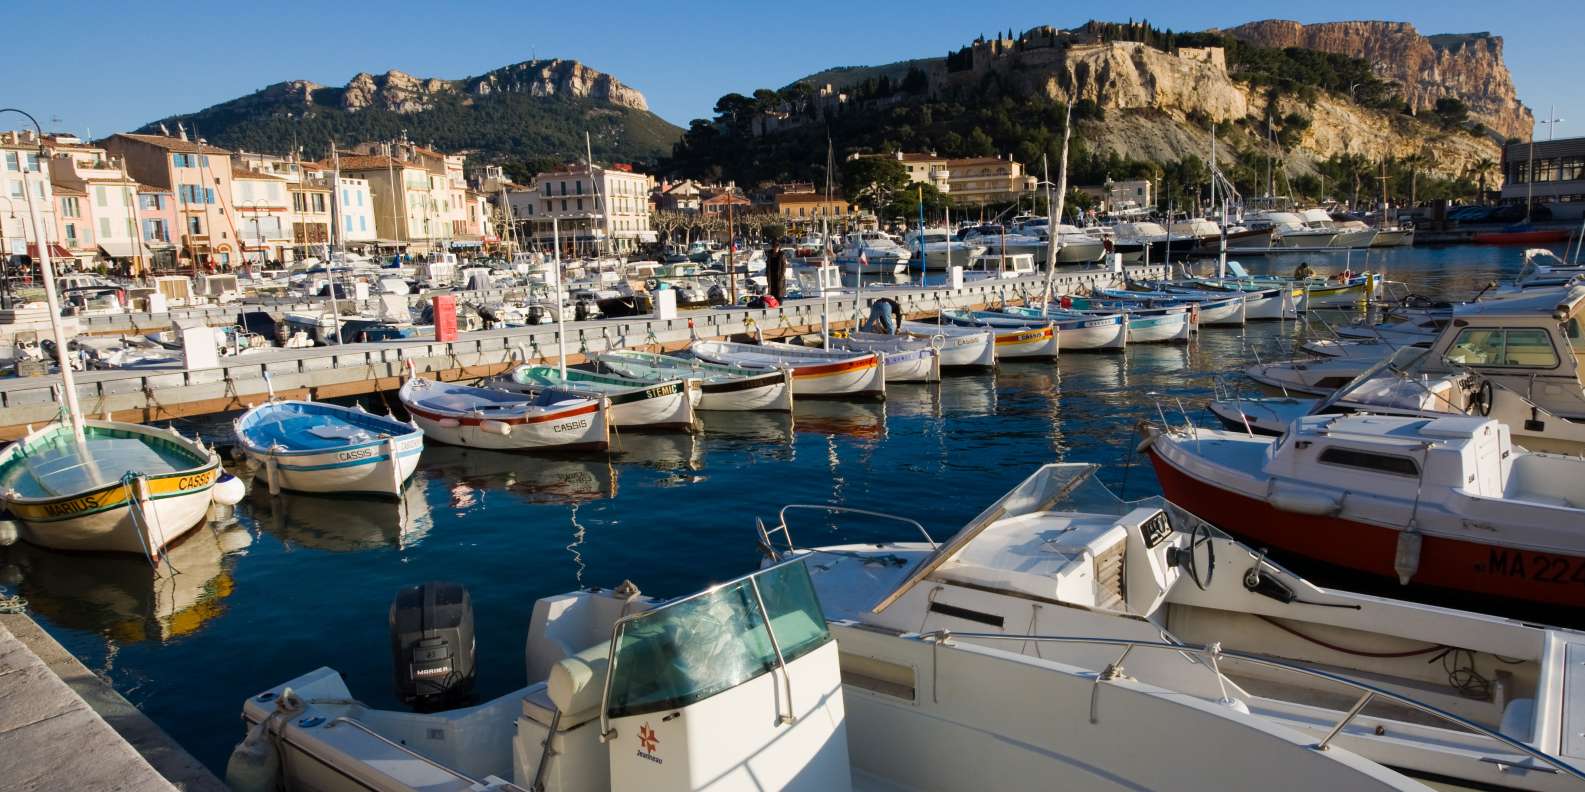 What to do in Cassis